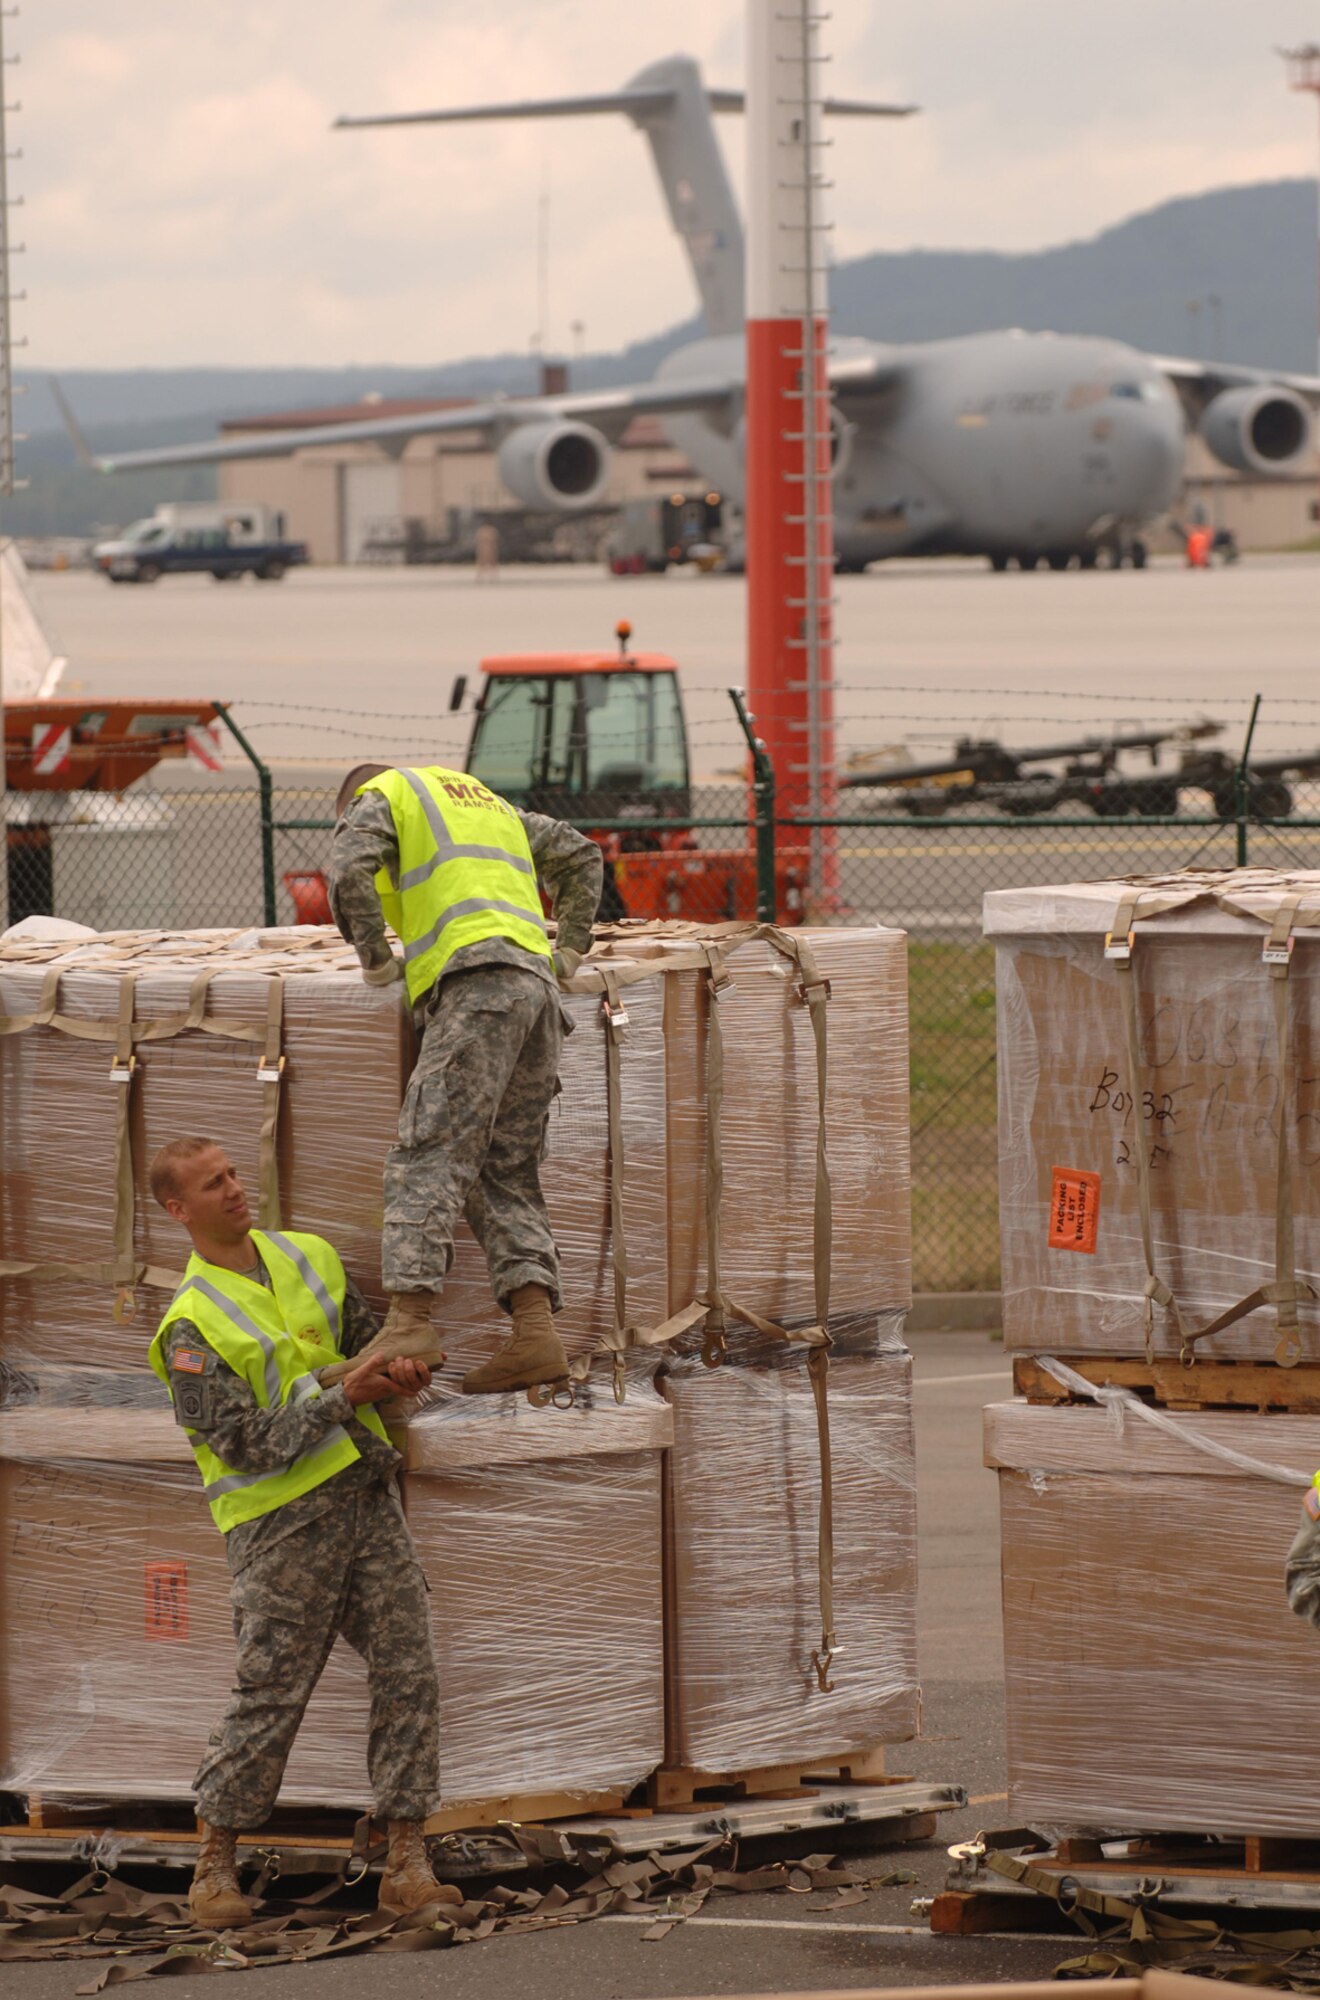 Army Specialist Alexandro Saldana gets a lift from Staff Sgt. Jeremiah Wolf before attaching netting to 18 pallets of sleeping bags and cots Aug 15, at Ramstein Air Base, Germany in preparation for delivery to the Republic of Georgia. The soldiers are assigned to the 66th Transportation Co, 39th Transportation Battalion based at nearby Kleber Kasserne. (Air Force Photo by Master Sgt. Scott Wagers / AFNEWS)(Released)